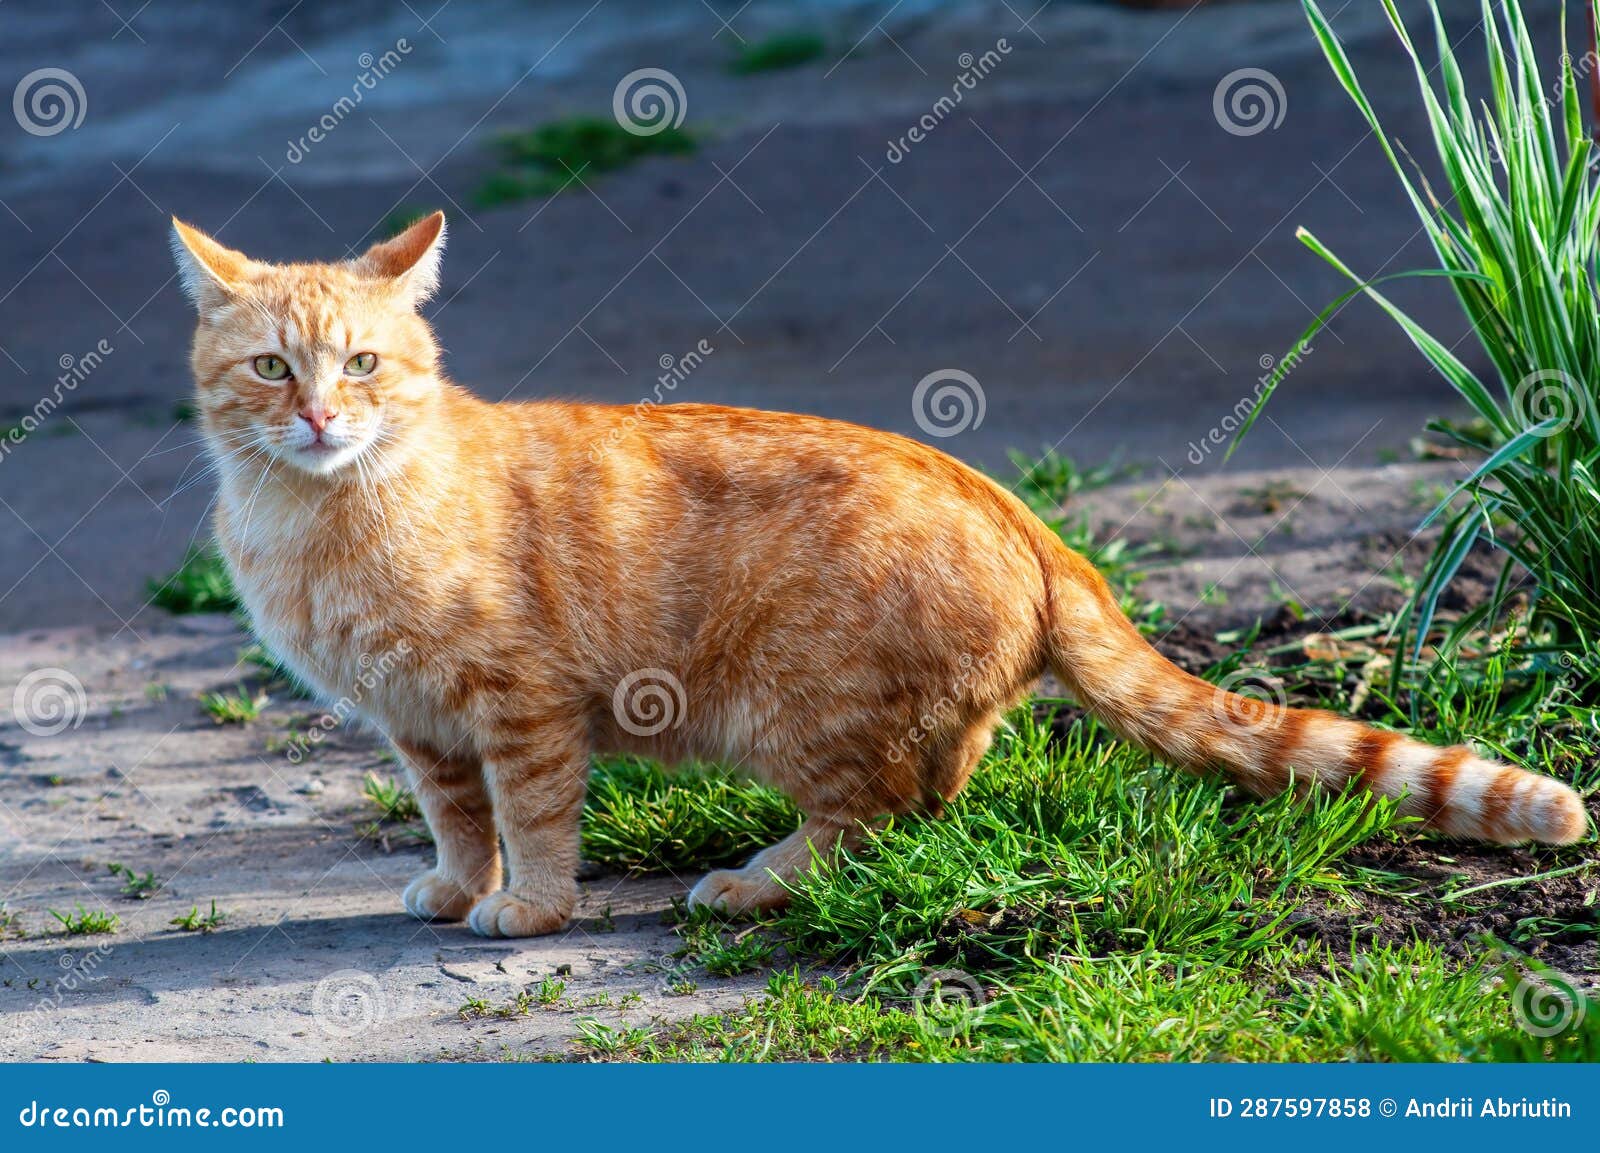 An Orange Tabby Cat Stands on a Sidewalk, Looking at the Camera. Stock ...